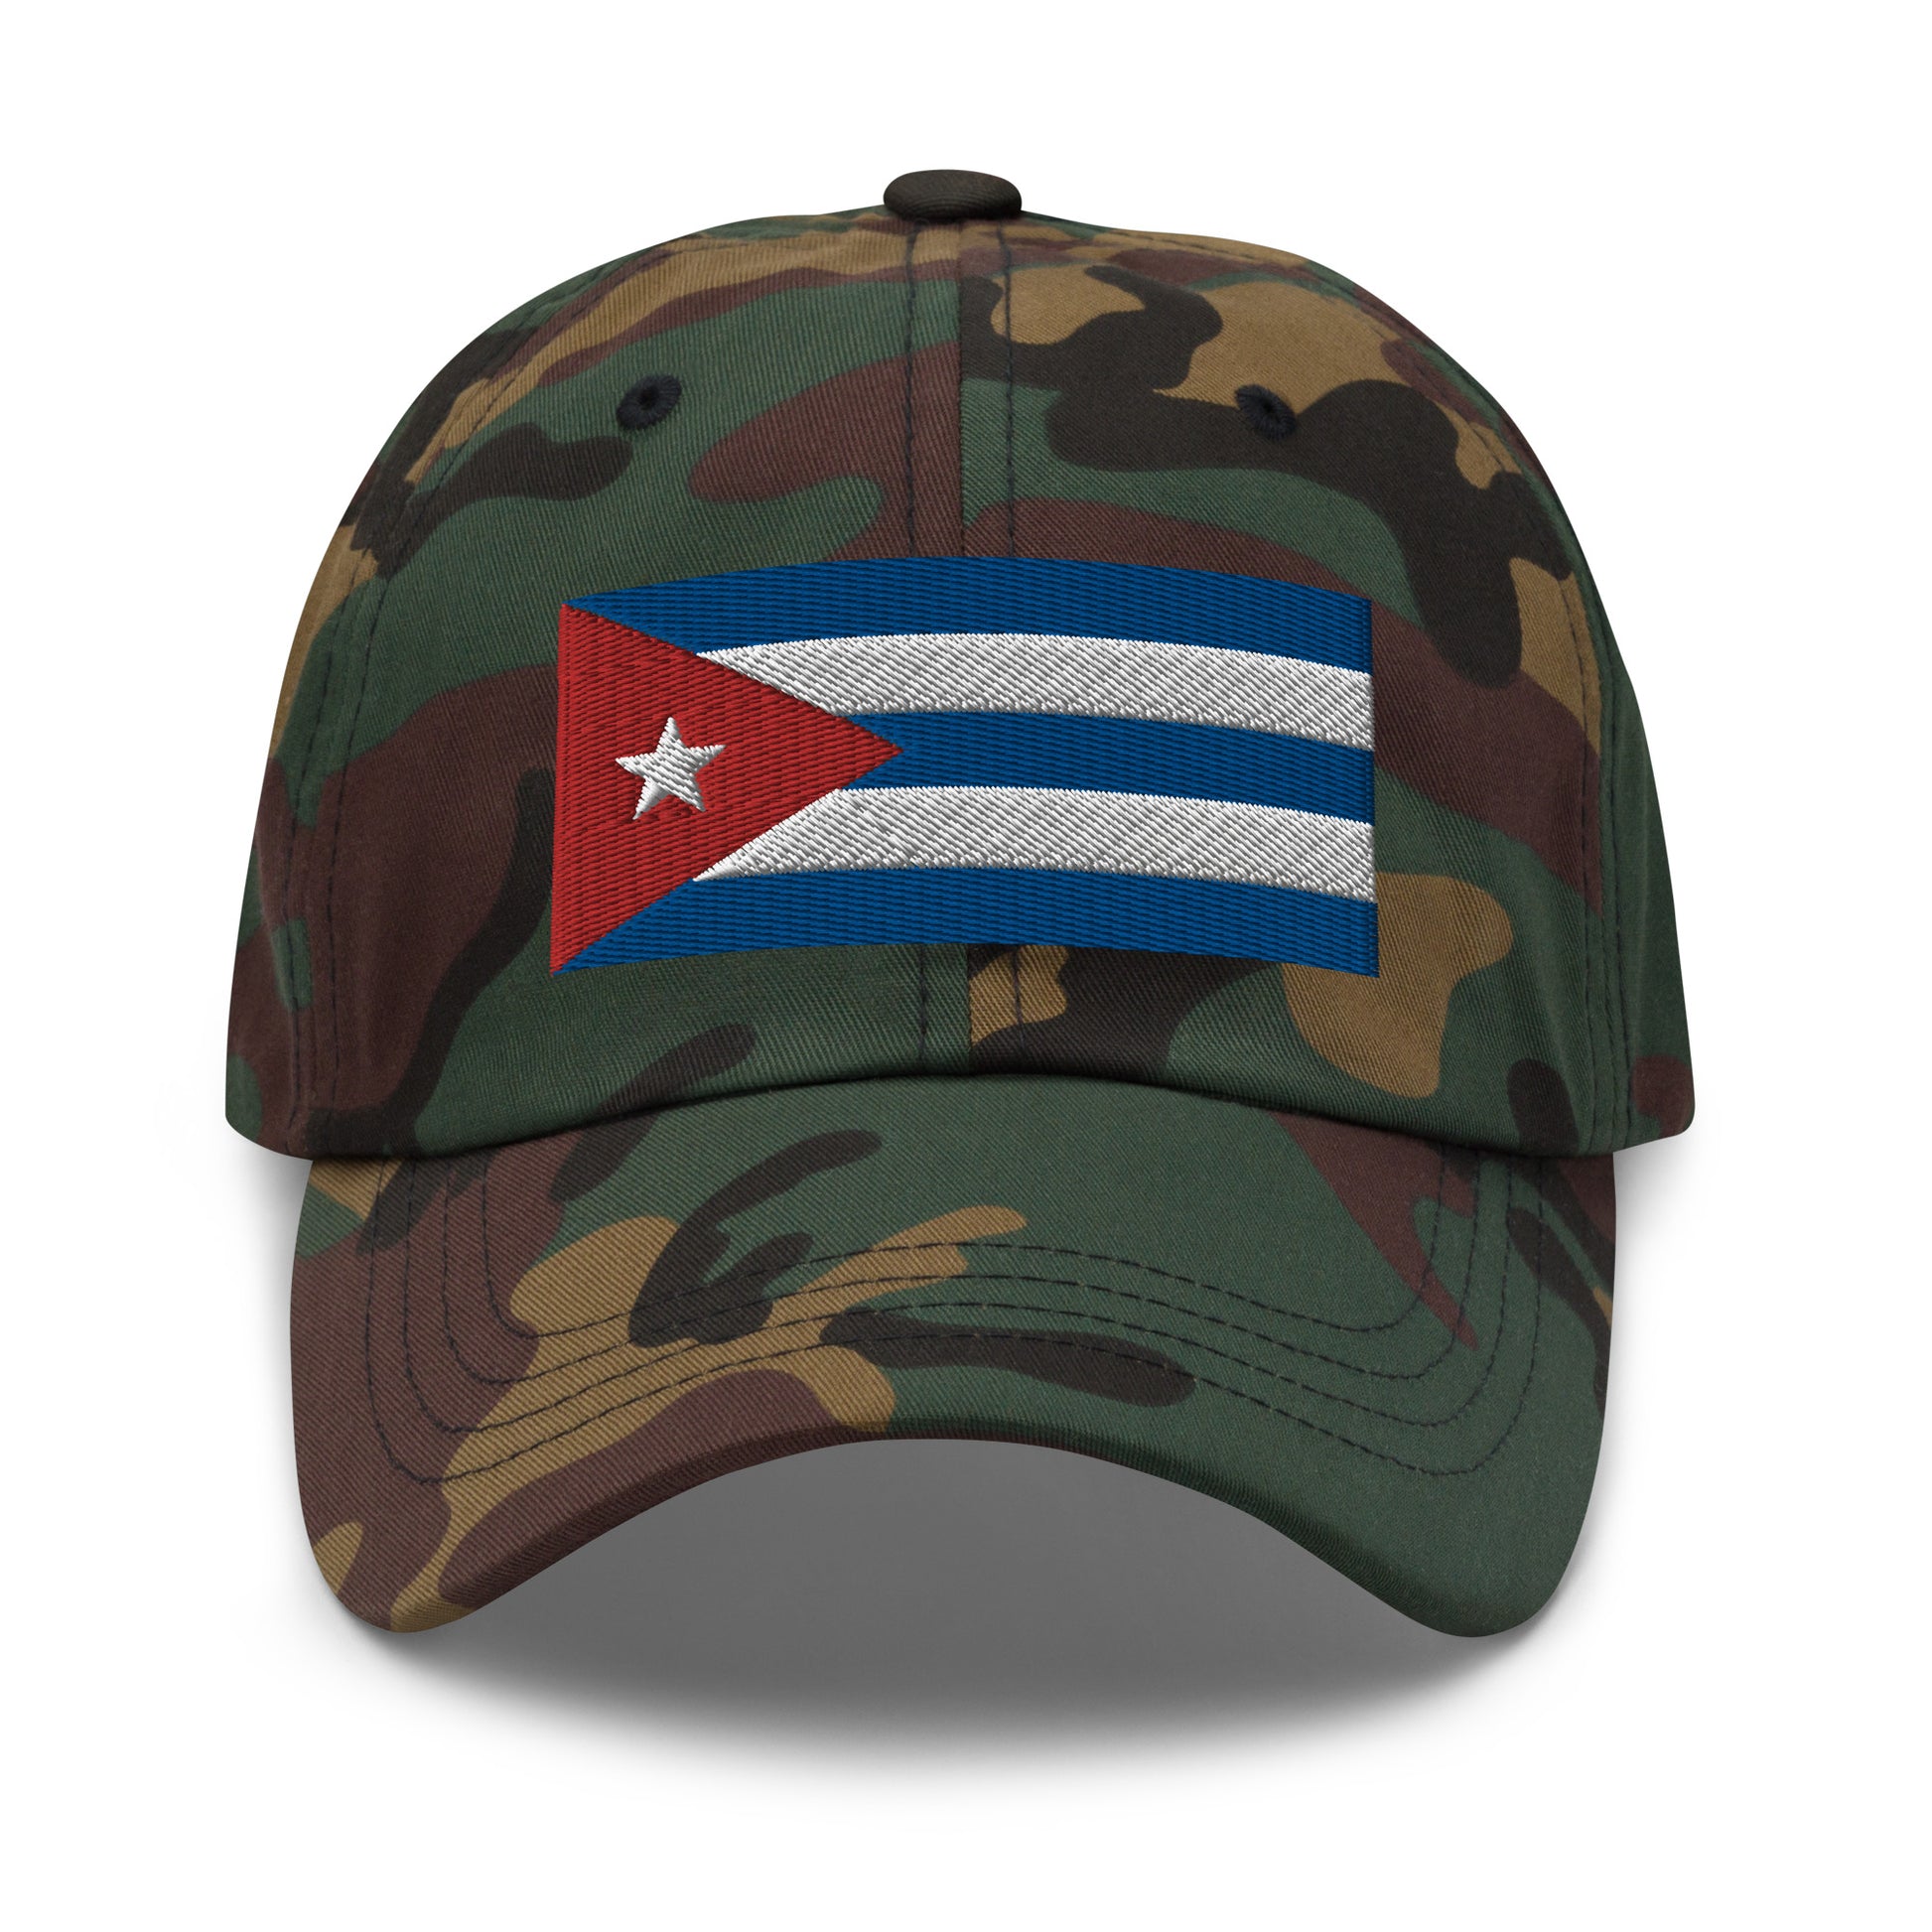 Cuban Dad Hat: Show your Cuban pride with this embroidered dad hat.